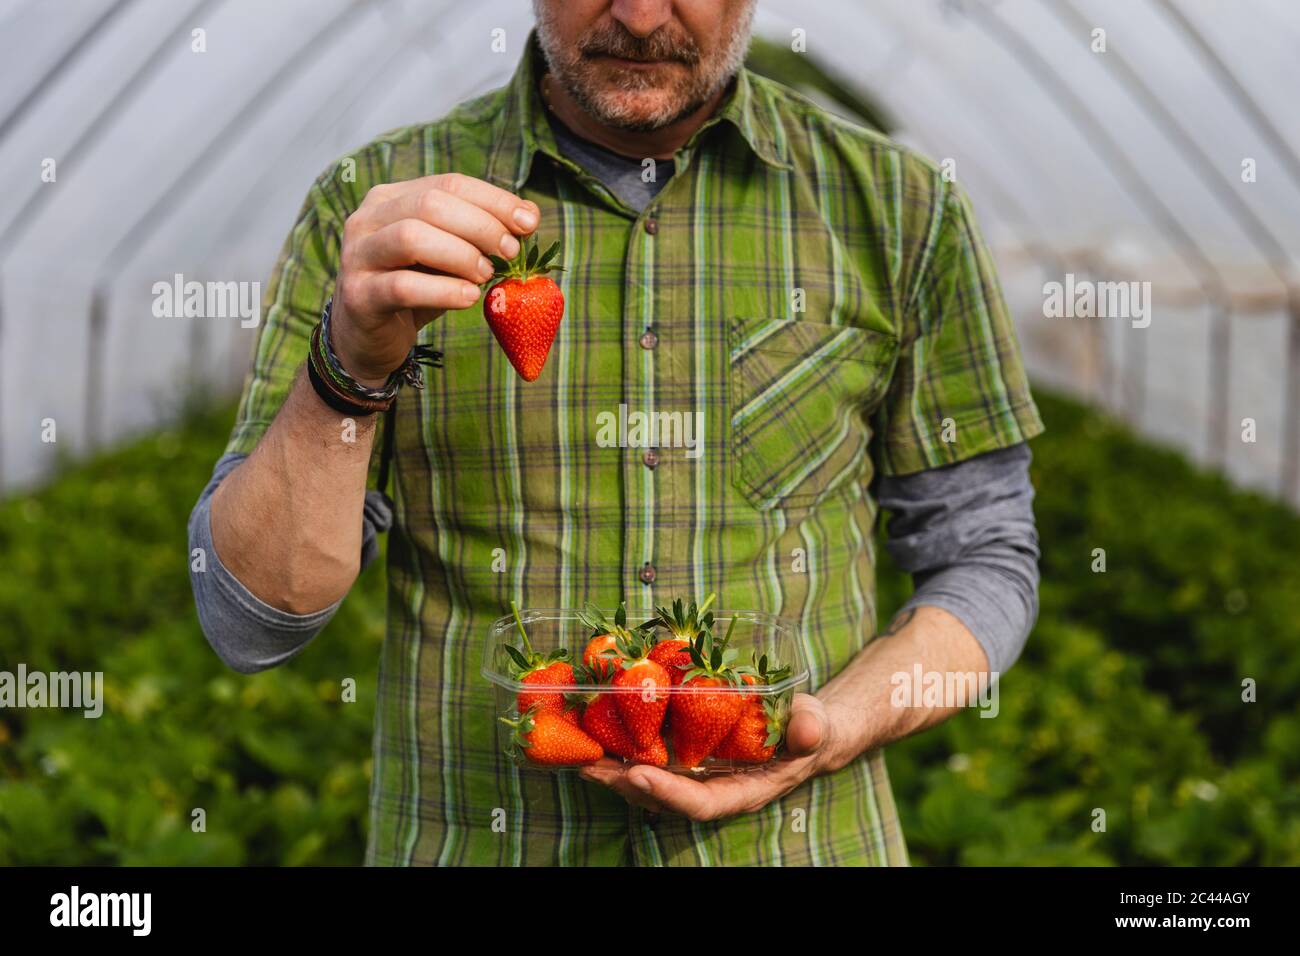 Farmer showing freshly picked strawberries, organic agriculture Stock Photo